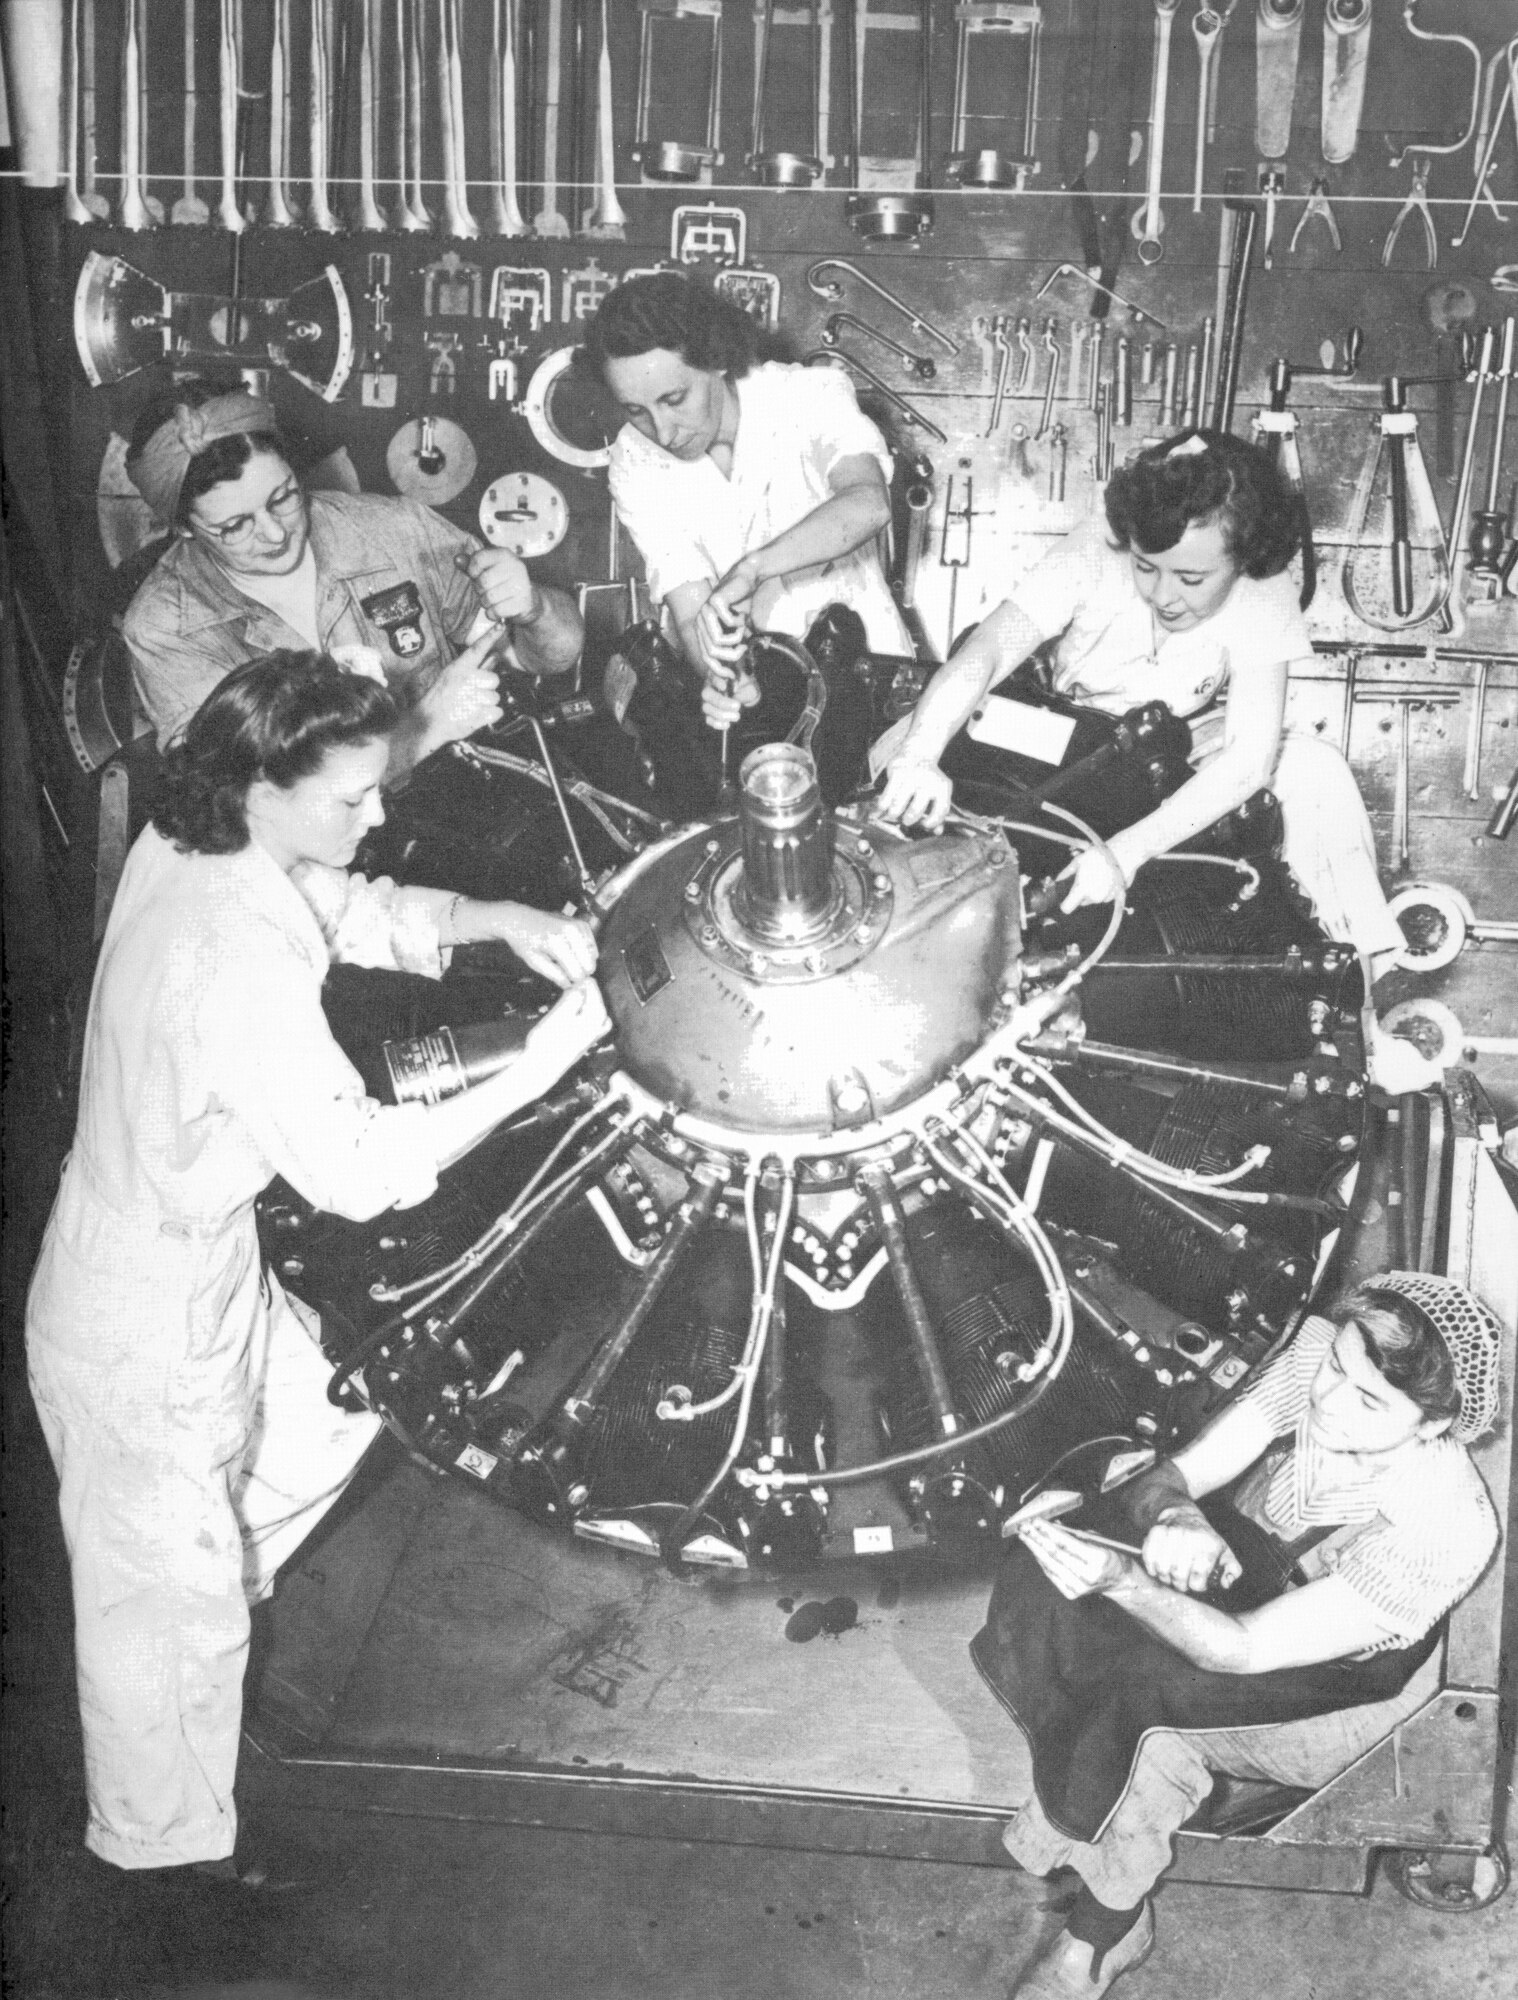 An all-woman engine crew at Tinker Field during World War II Era. Women comprised 65 percent of the aircraft industry by 1943. (Photo courtesy of Tinker History Office)